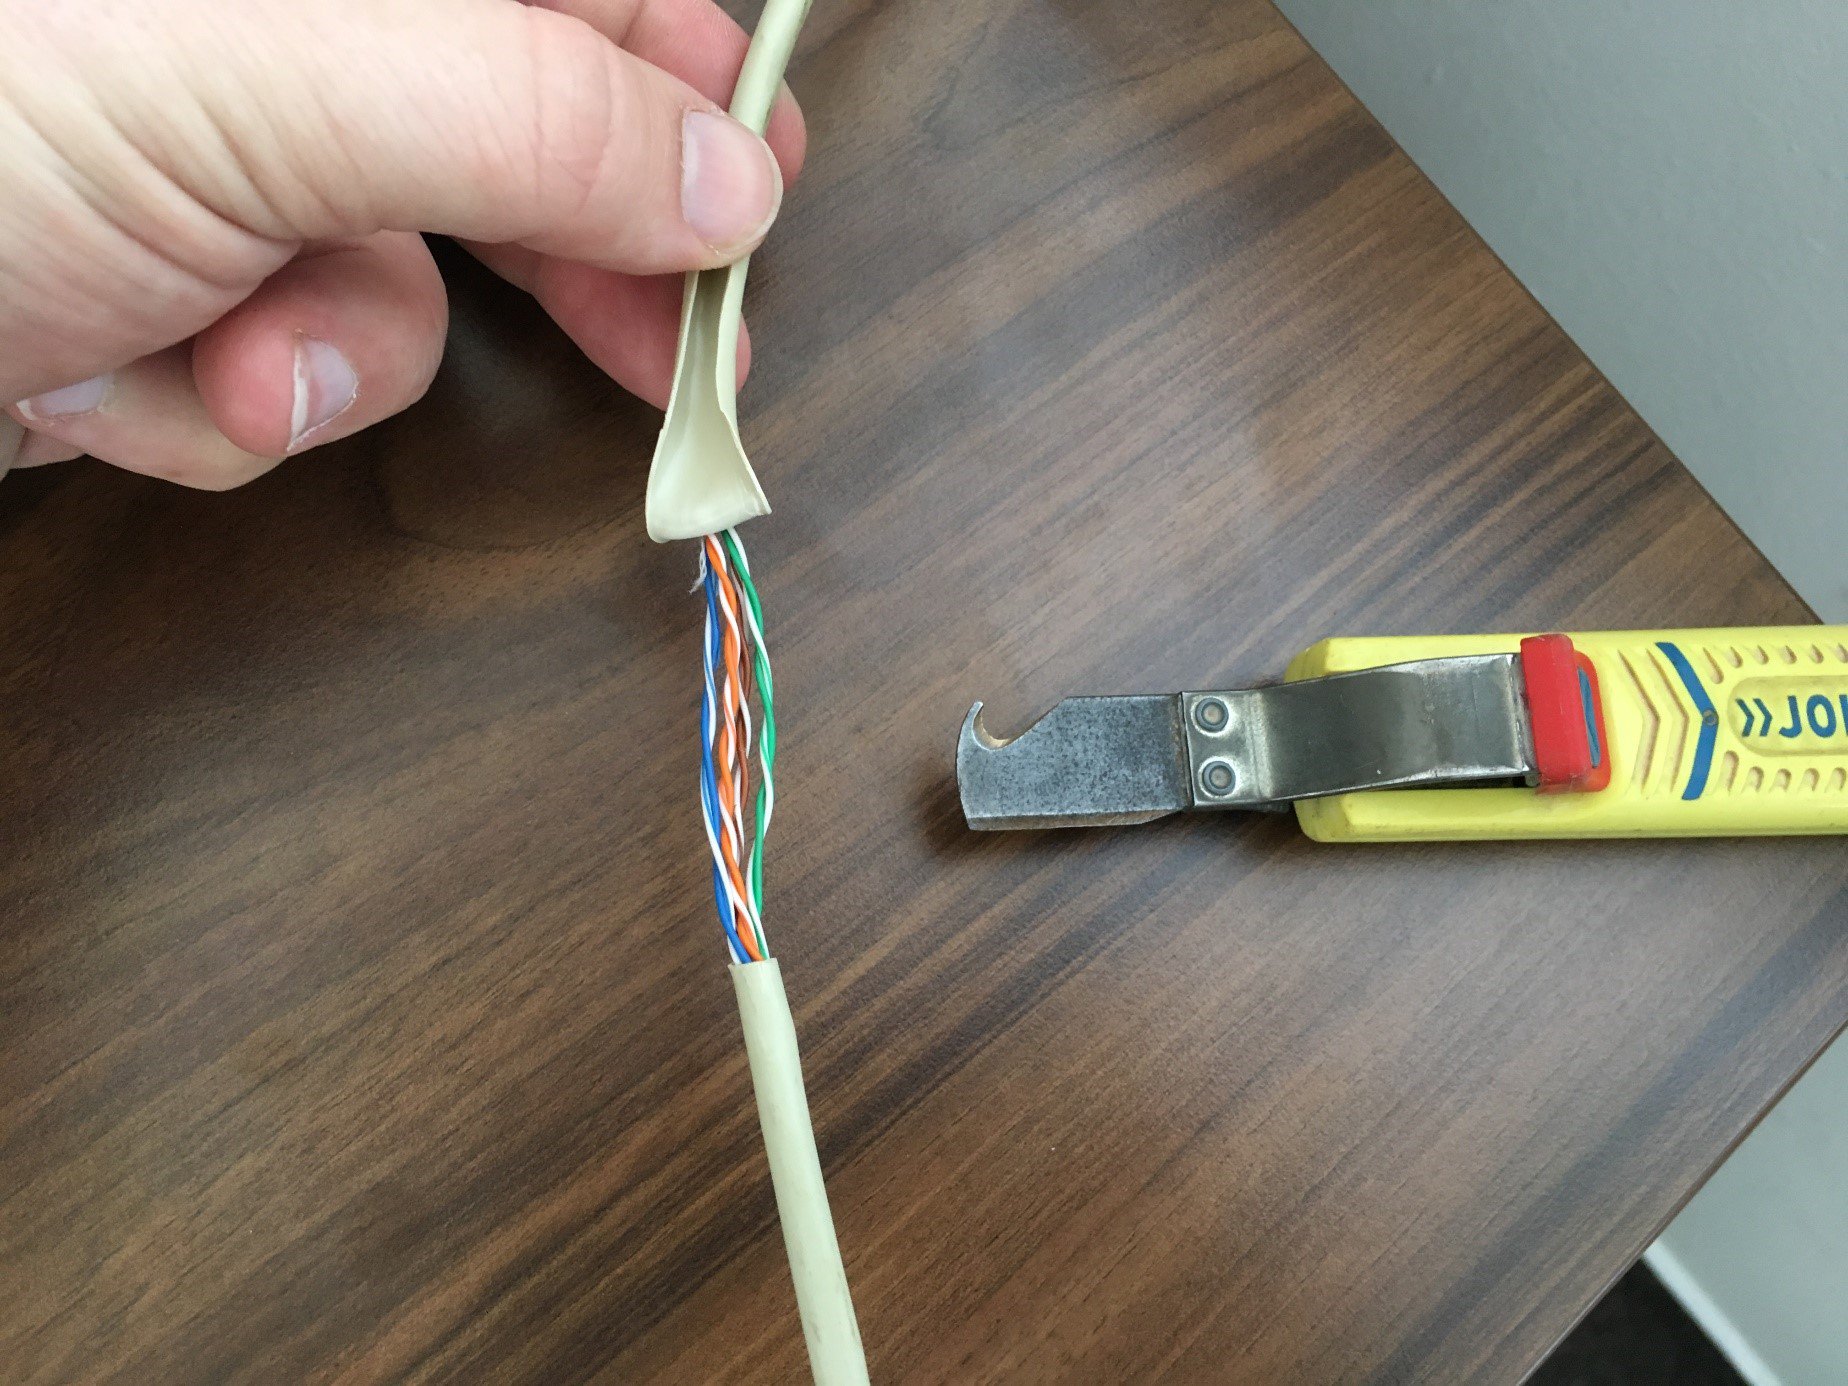 Removing the cable protective isolation